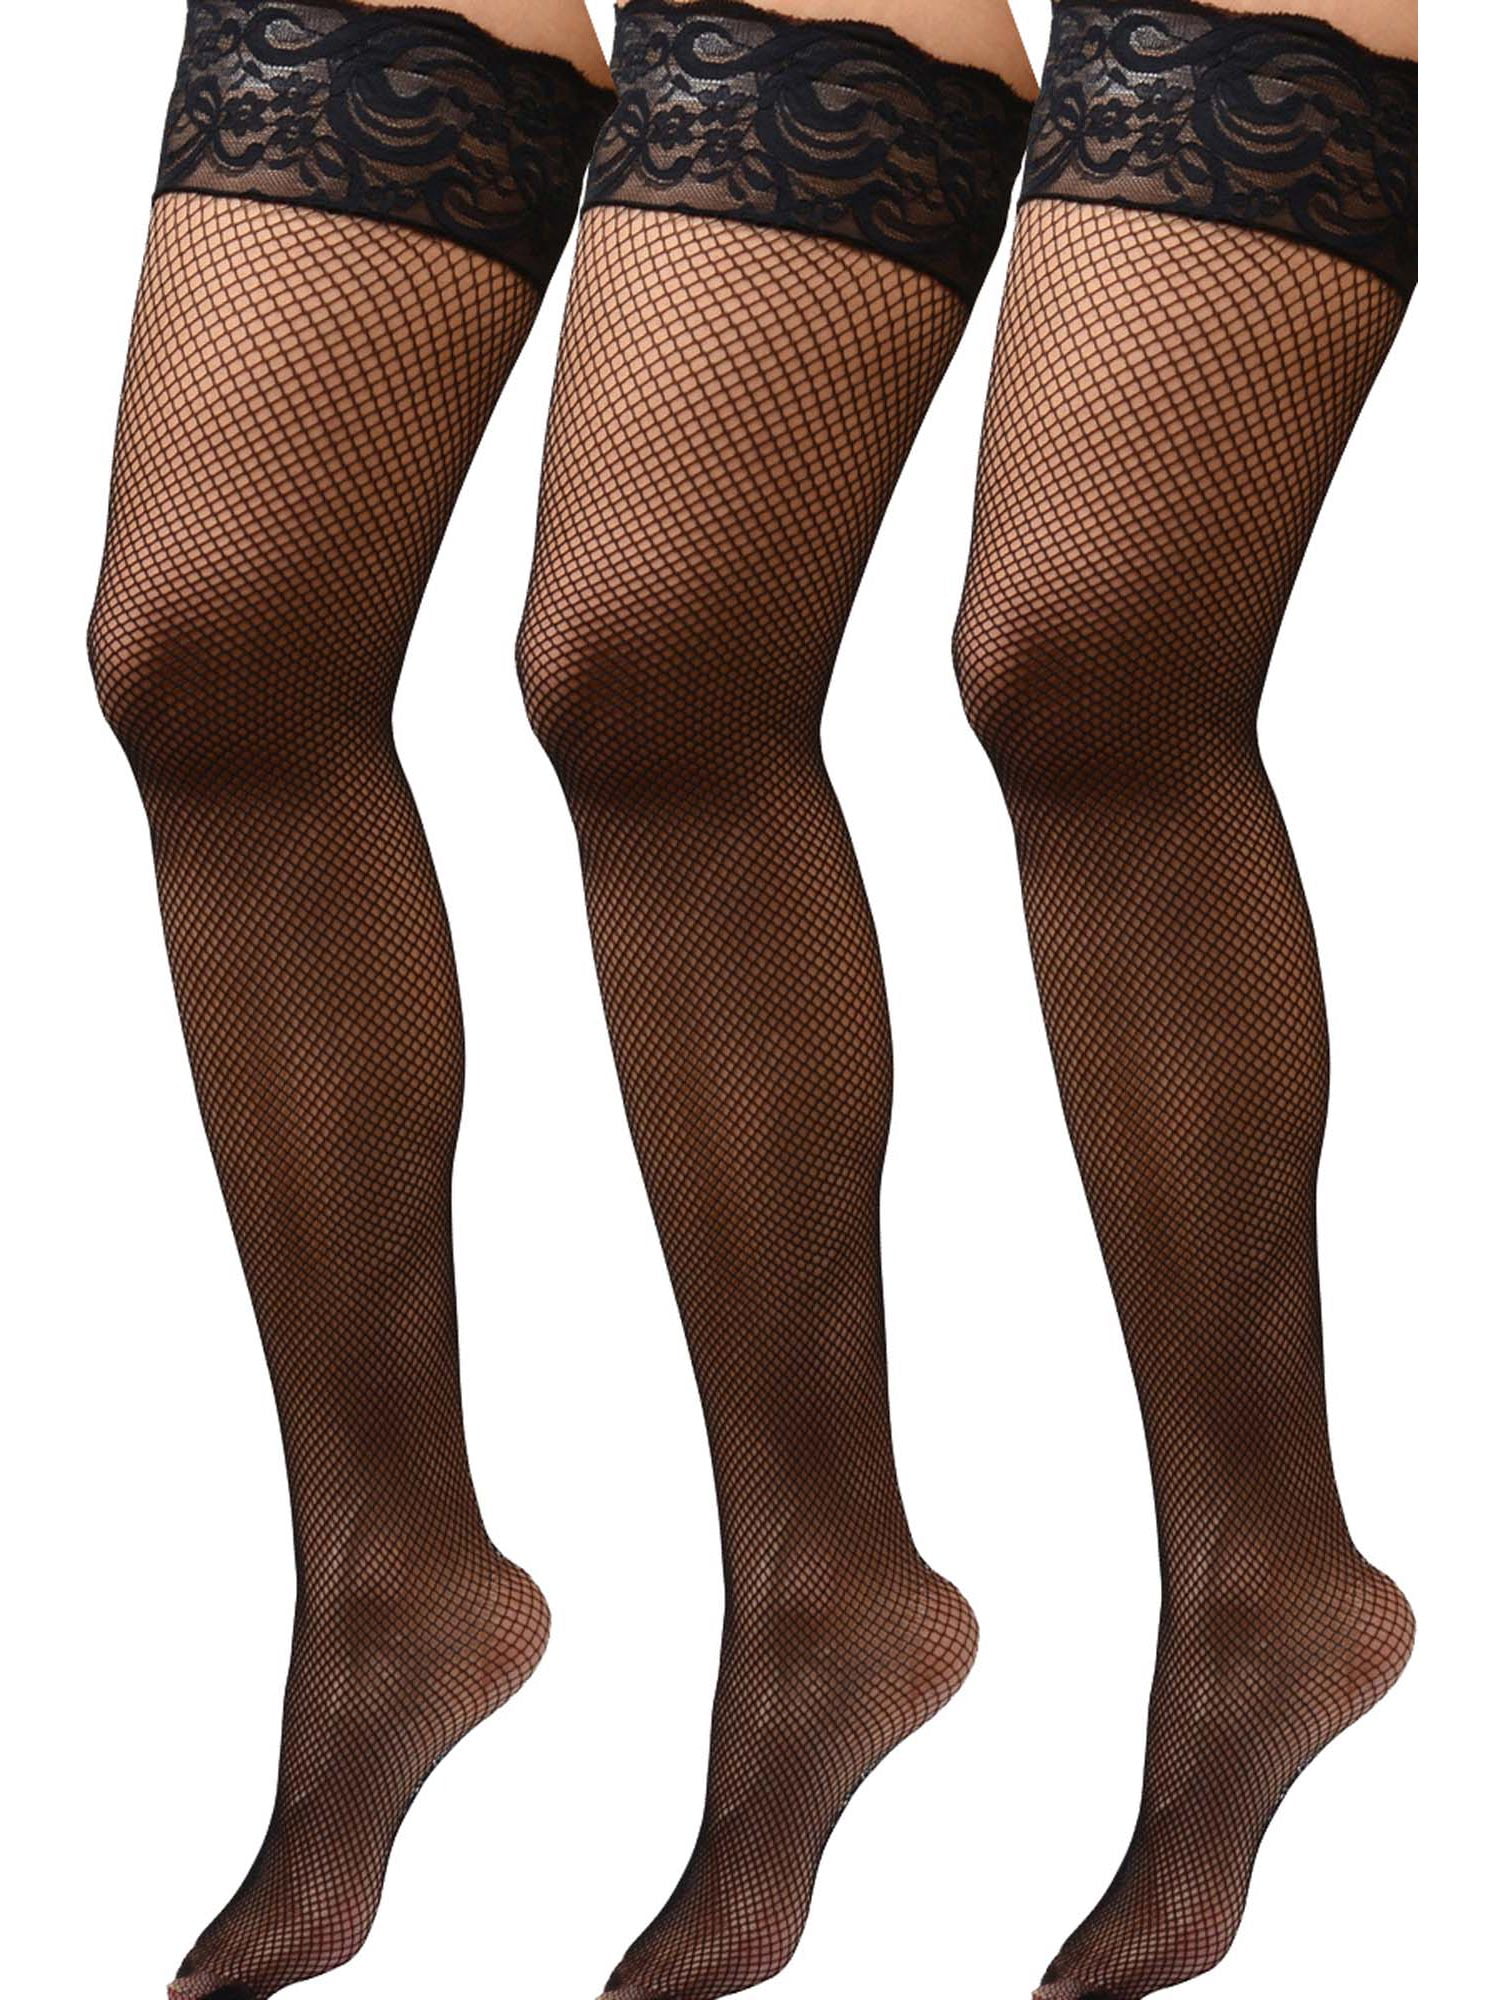 Lace Top Stay Up Fishnet White Thigh High Stocking Hosiery Costume Accessories 